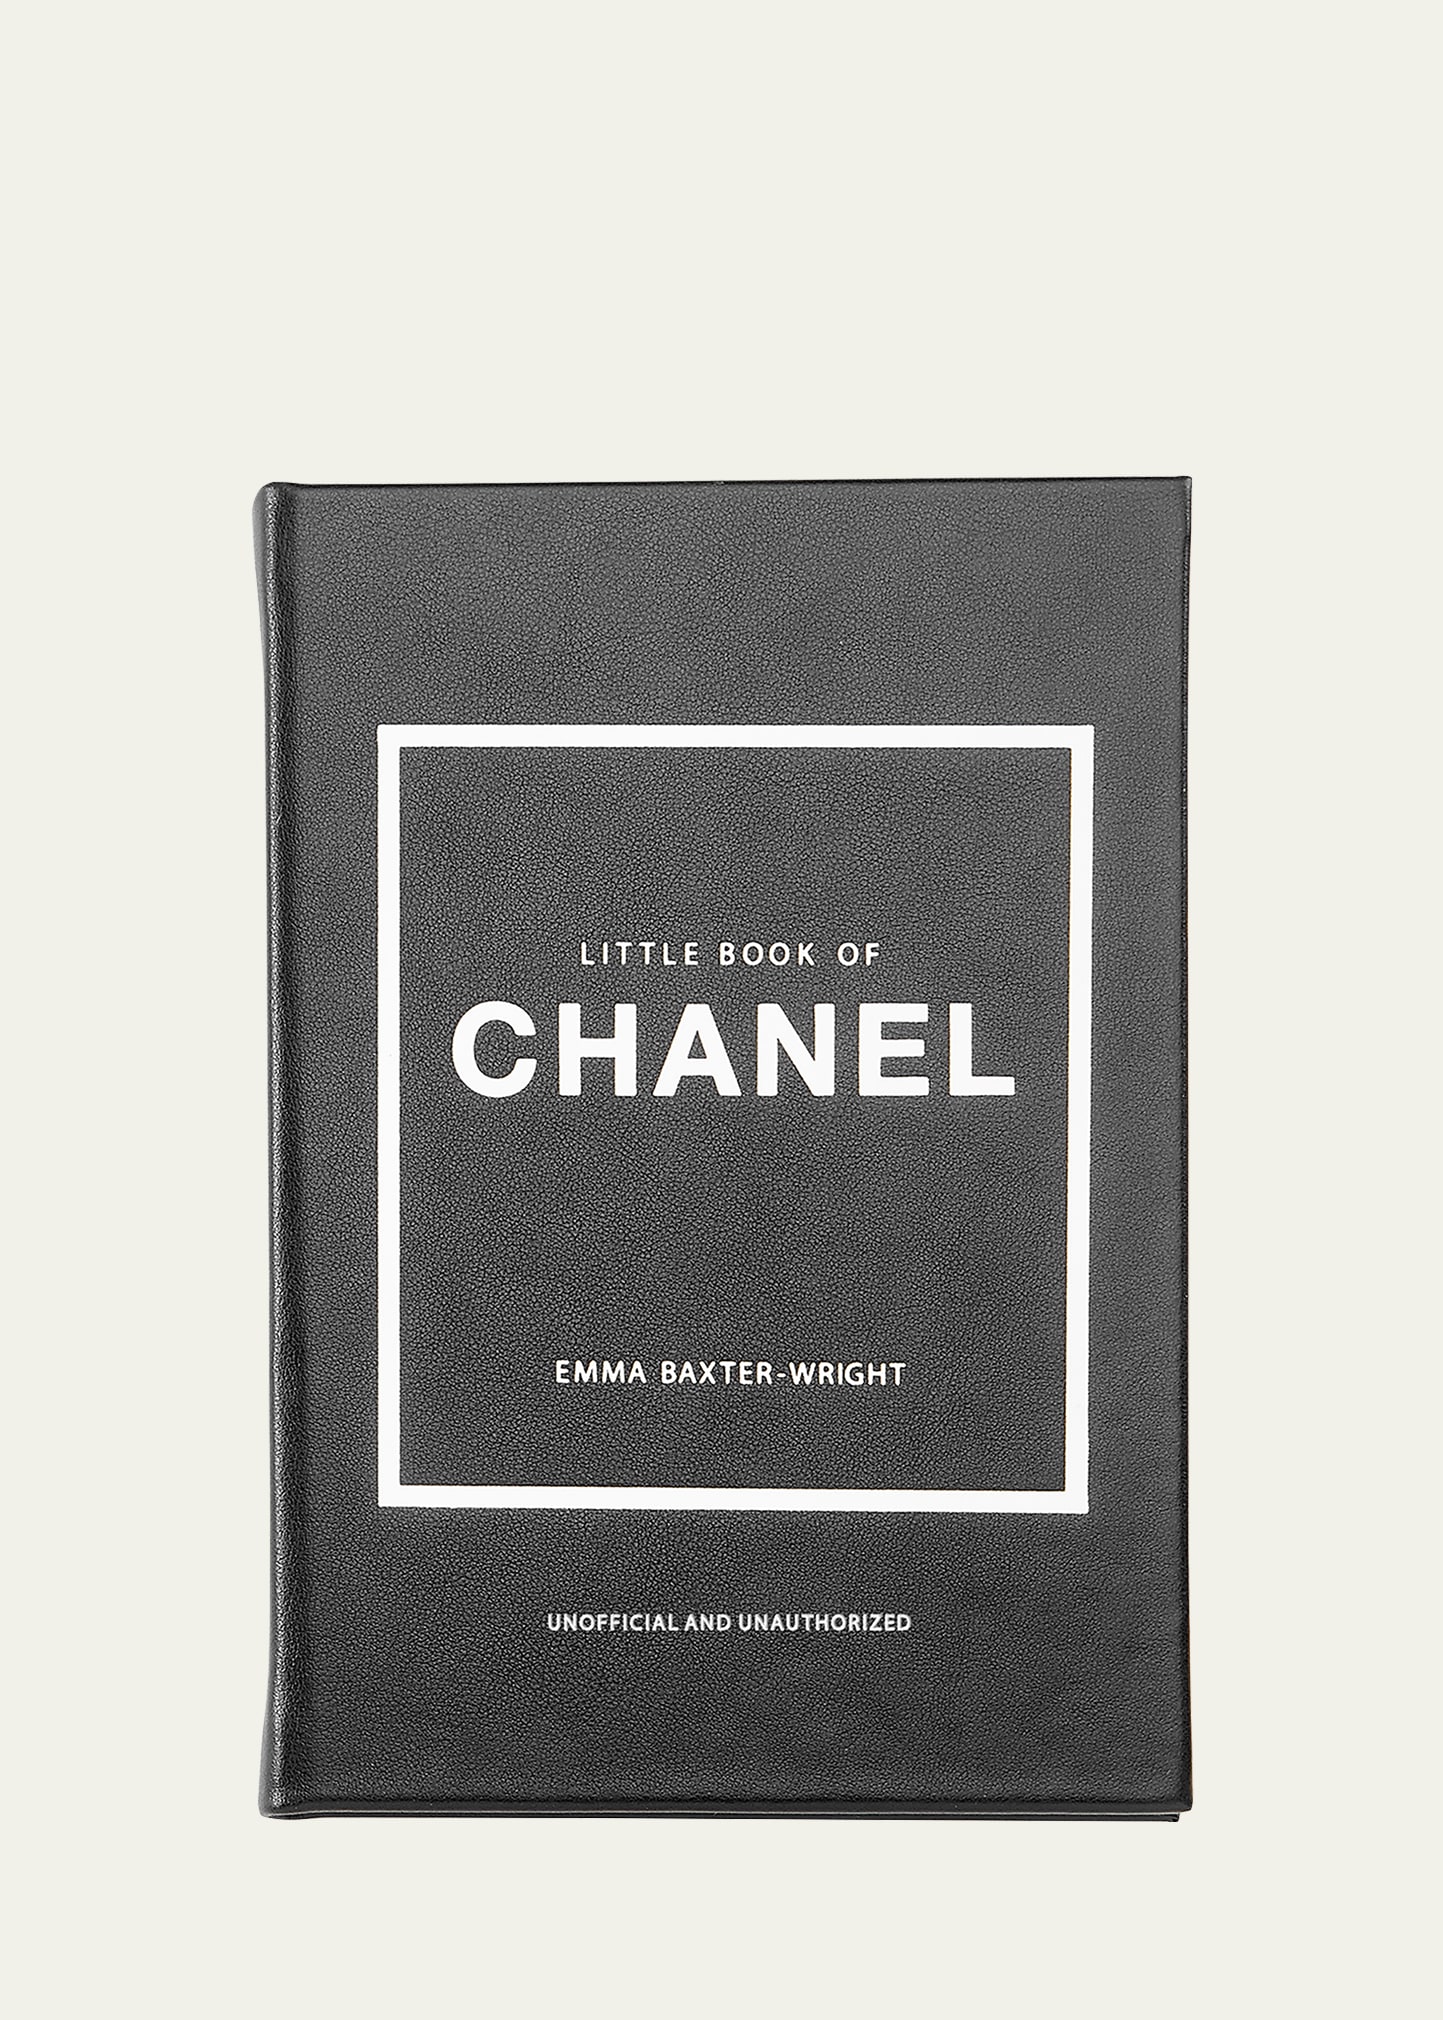 "Little Book of Chanel" Book